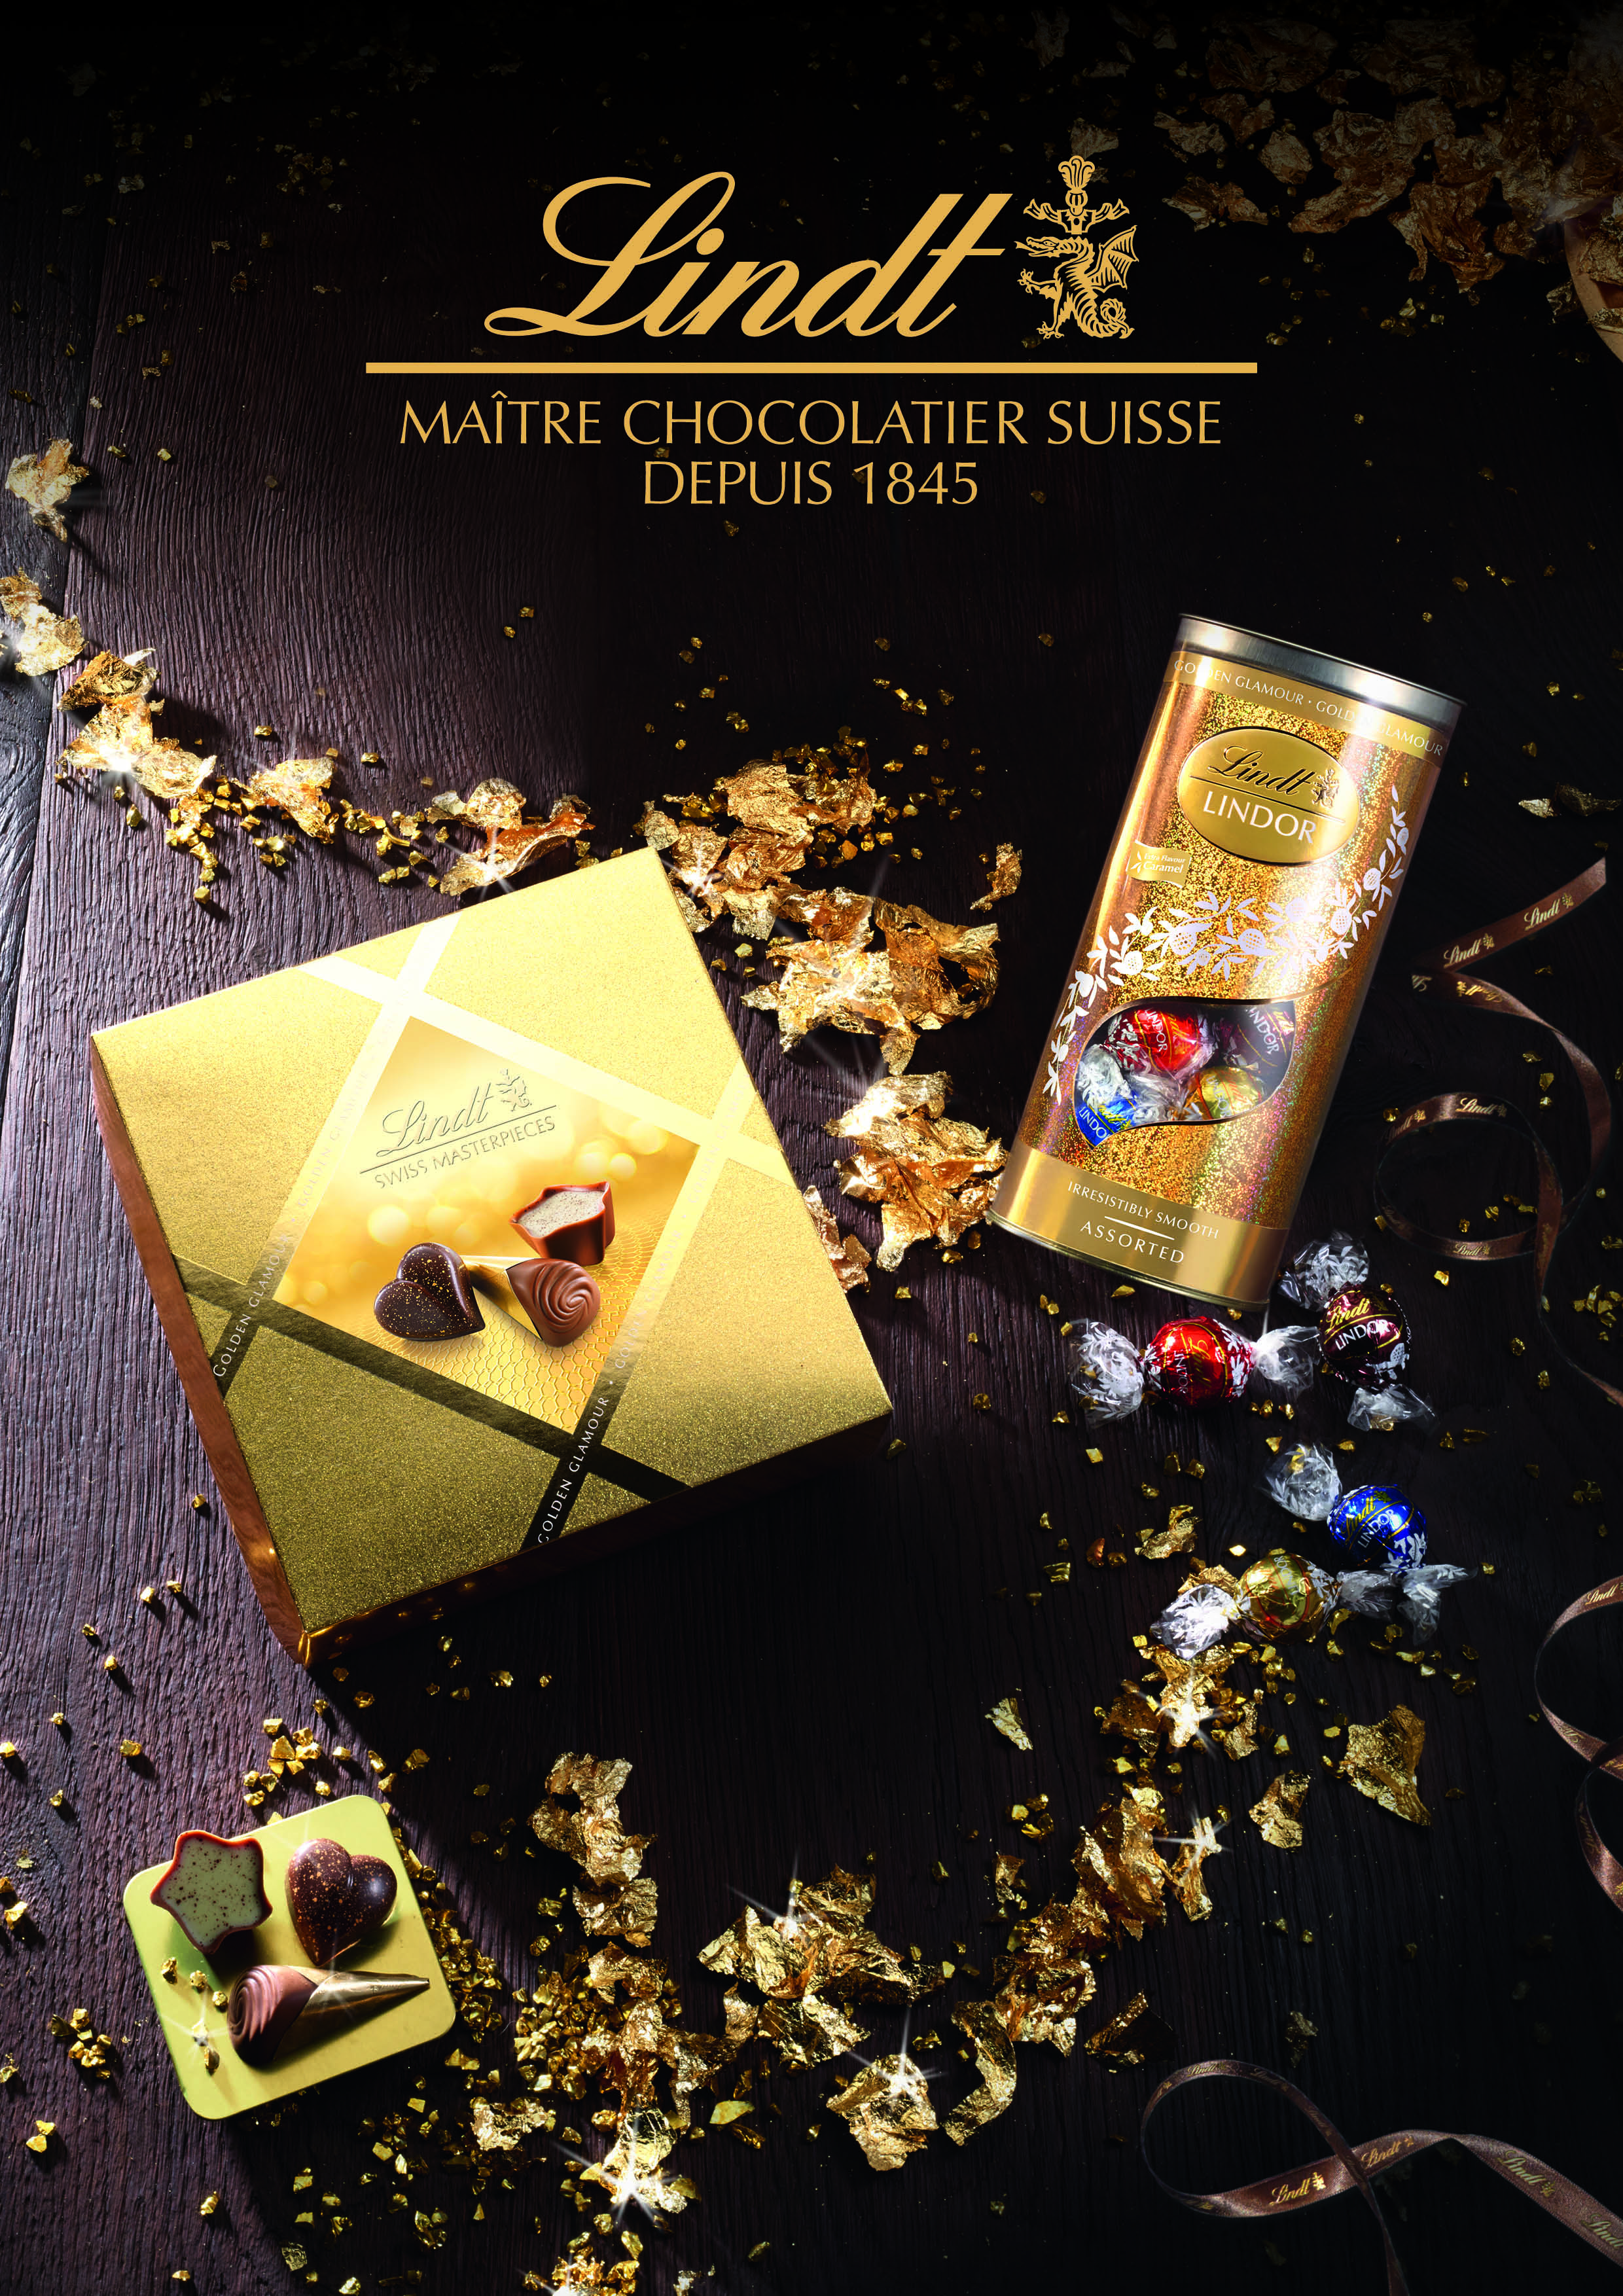 LINDT to launch new festive gifting ranges at TFWA exhibition and conference in Singapore